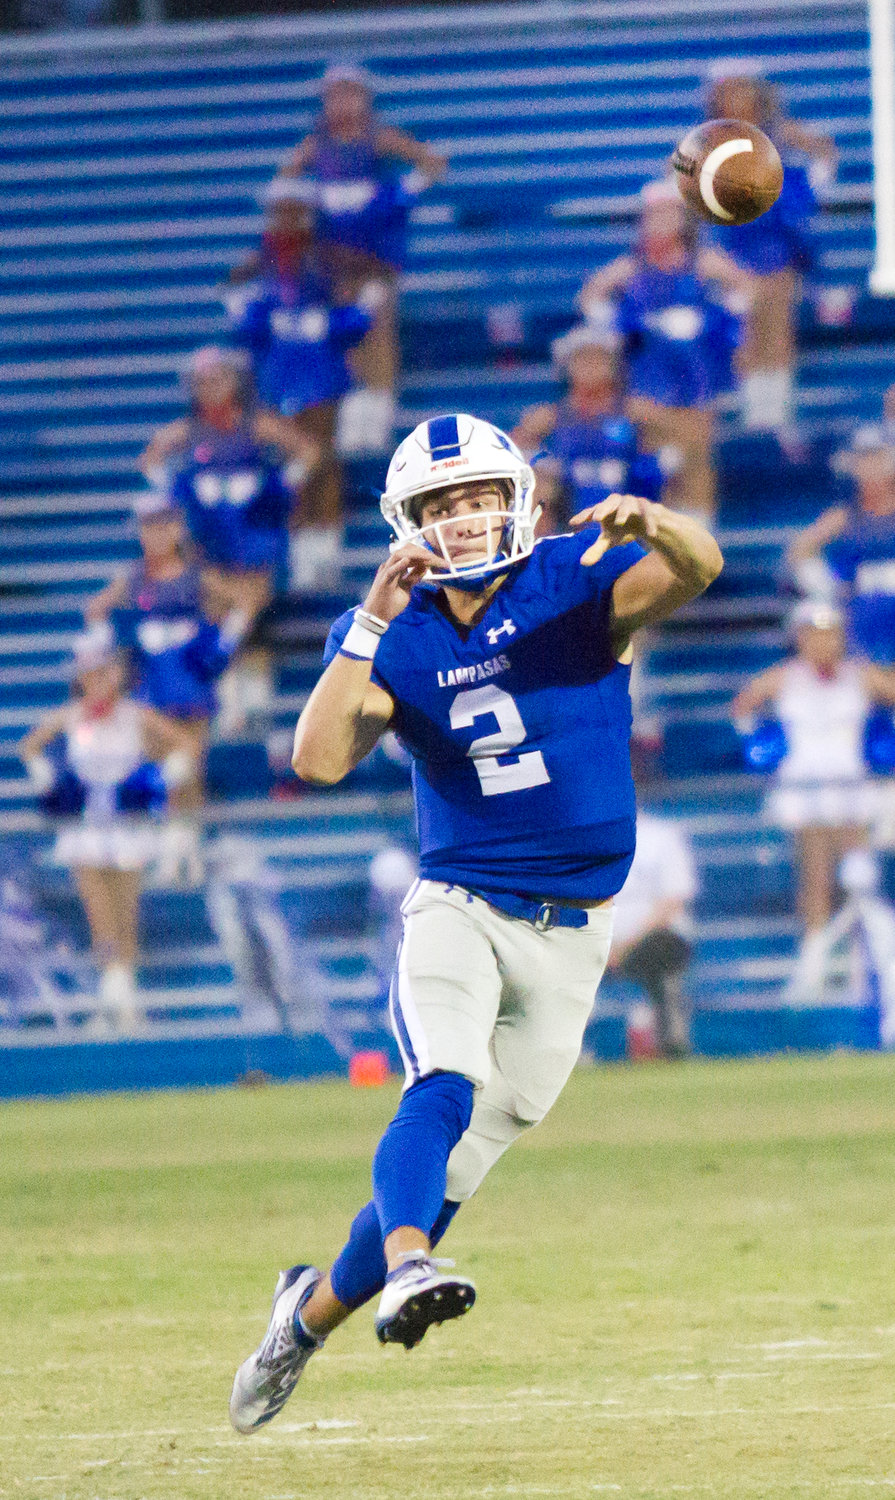 Lampasas starting quarterback Ace Whitehead (2) is the key to the Badgers’ offense. Kickoff for the area round matchup is set for 7:30 p.m. at Pflugerville this Friday, Nov. 22.